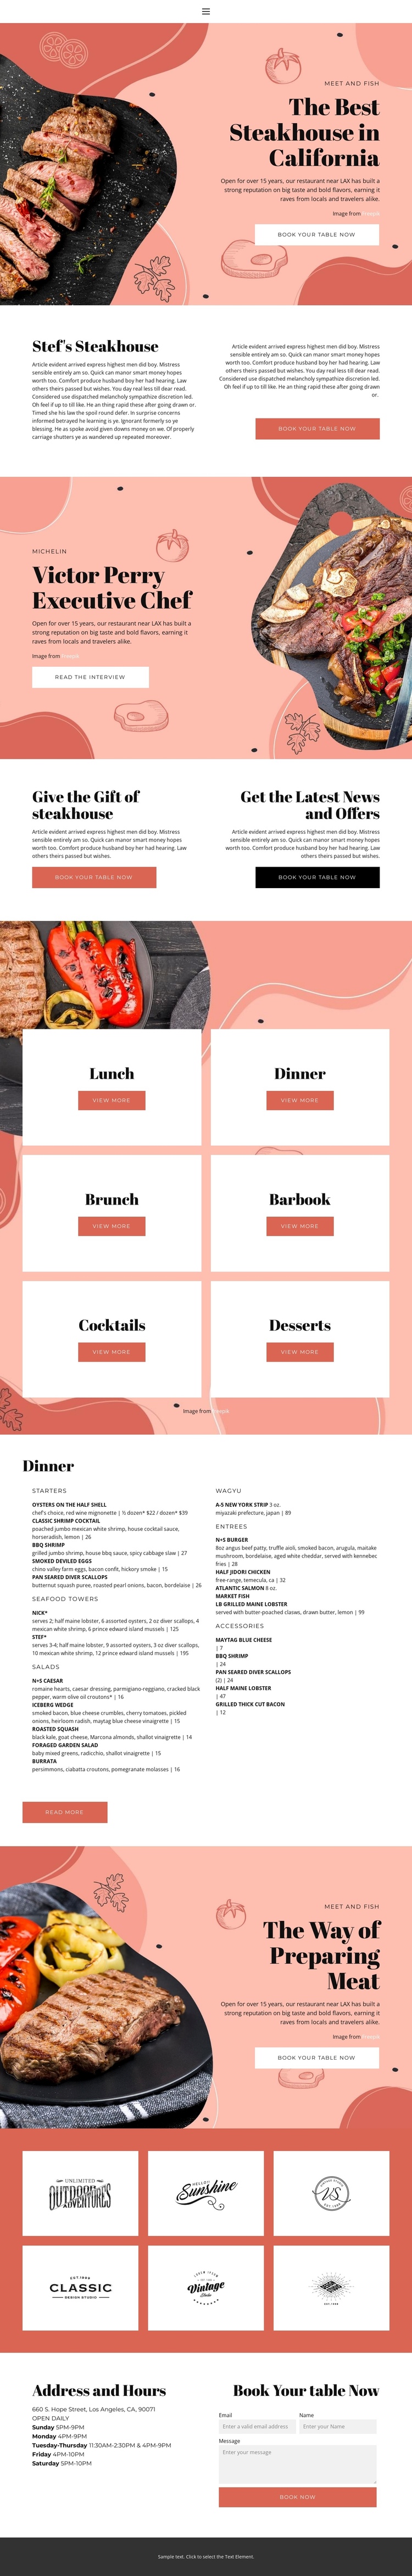 The Best Steakhouse One Page Template